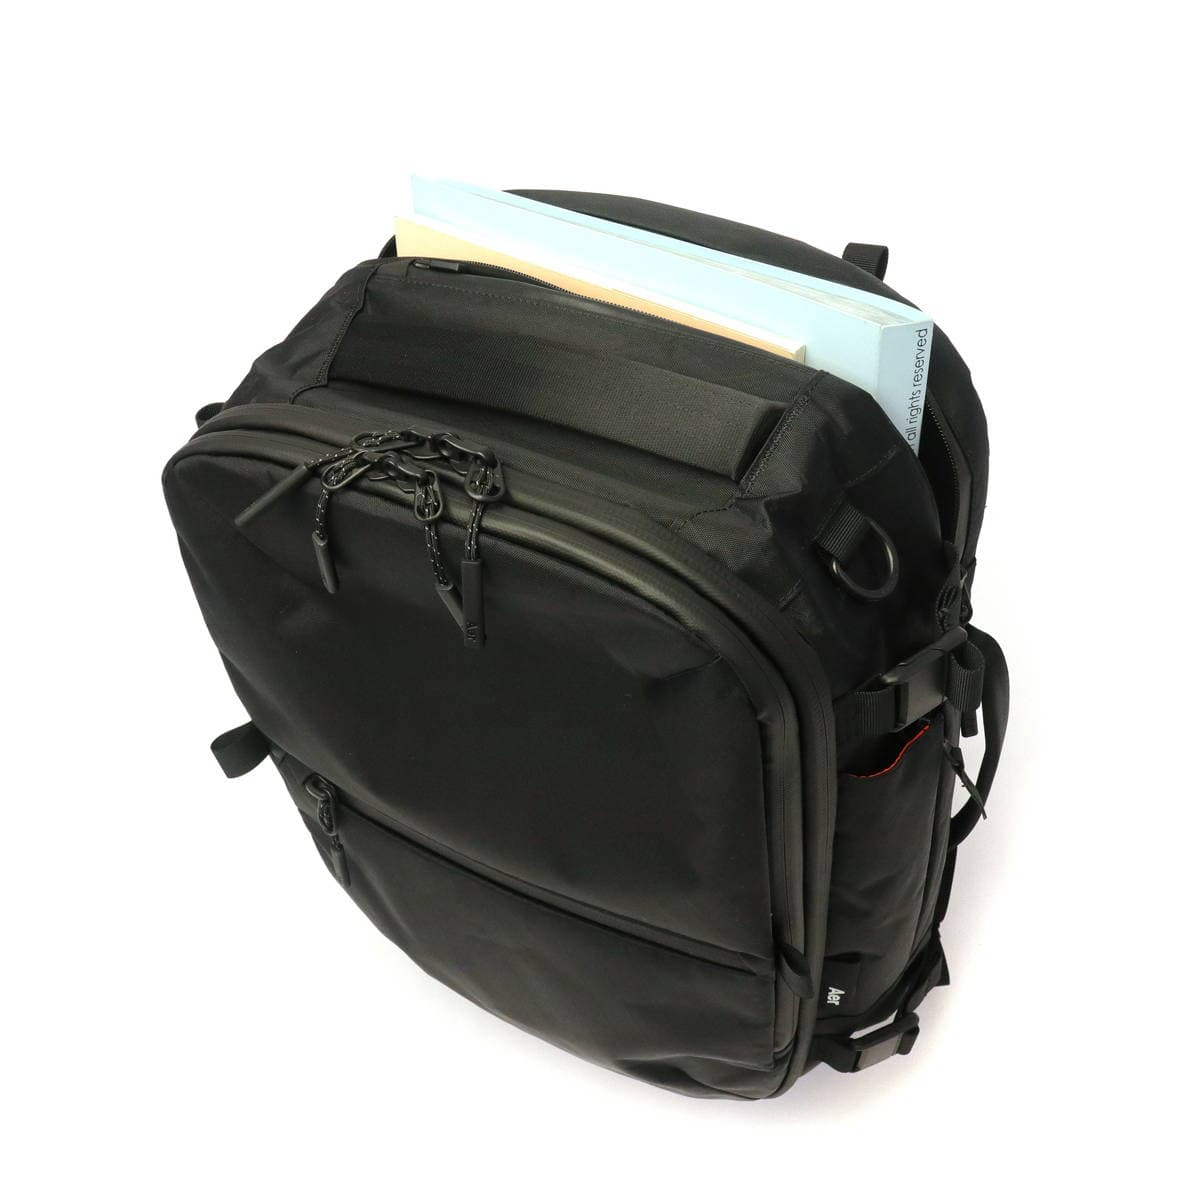 Aer エアー Travel Collection Travel Pack 3 Small X-Pac バック ...